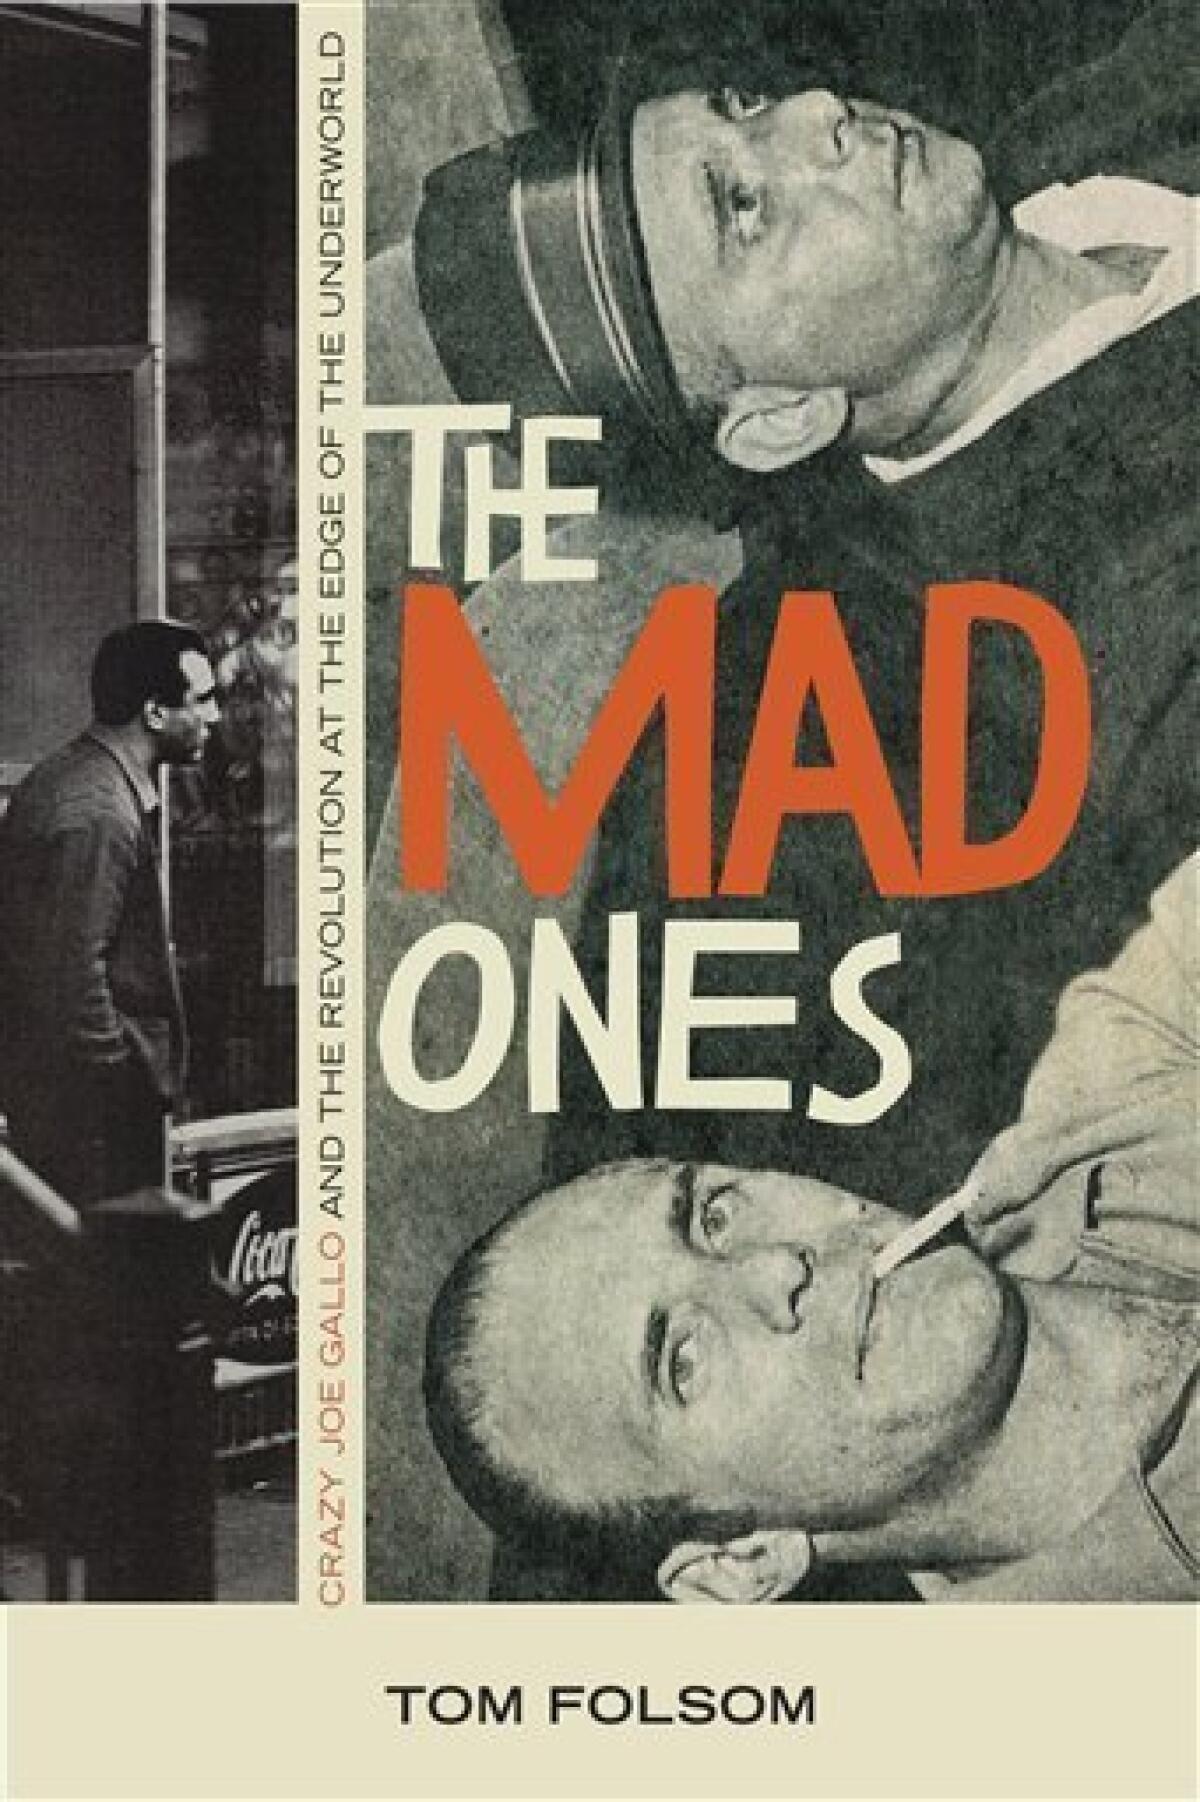 In this book cover image released by Weinstein Books, "The Mad Ones: Crazy Joe Gallo and the Revolution at the Edge of the Underworld," by Tom Folsom, is shown. (AP Photo/Weinstein Books)